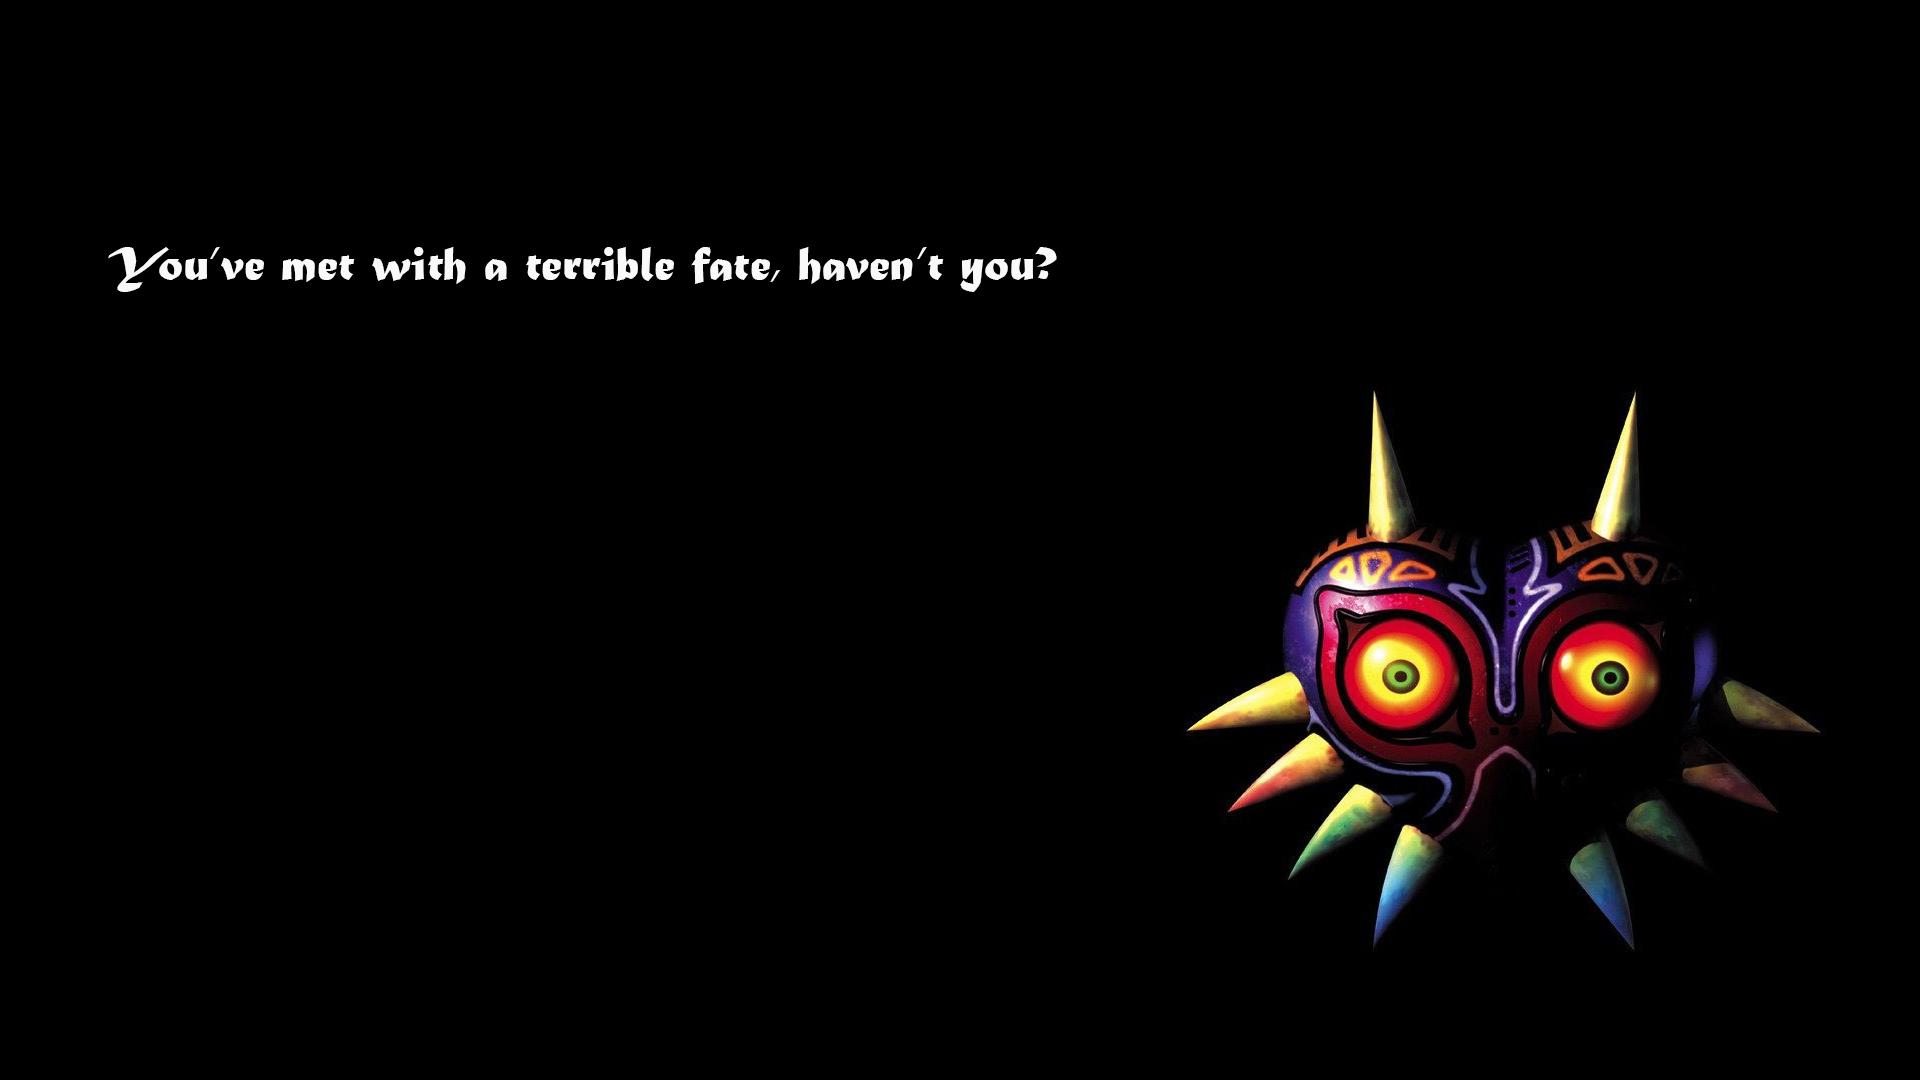 An awesome Majora's Mask wallpaper [OC]